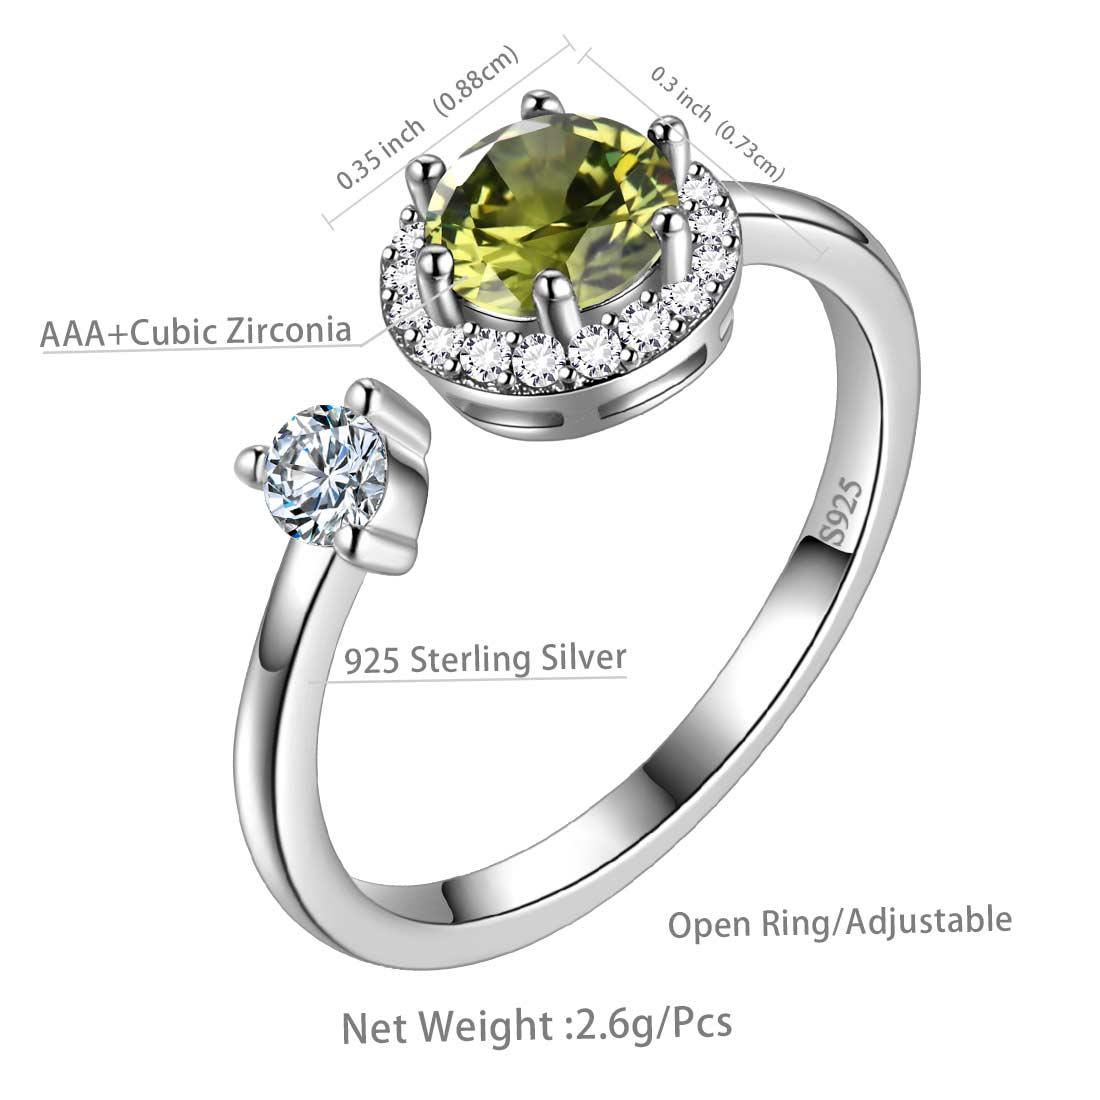 Round Birthstone August Peridot Ring Open Sterling Silver - Rings - Aurora Tears